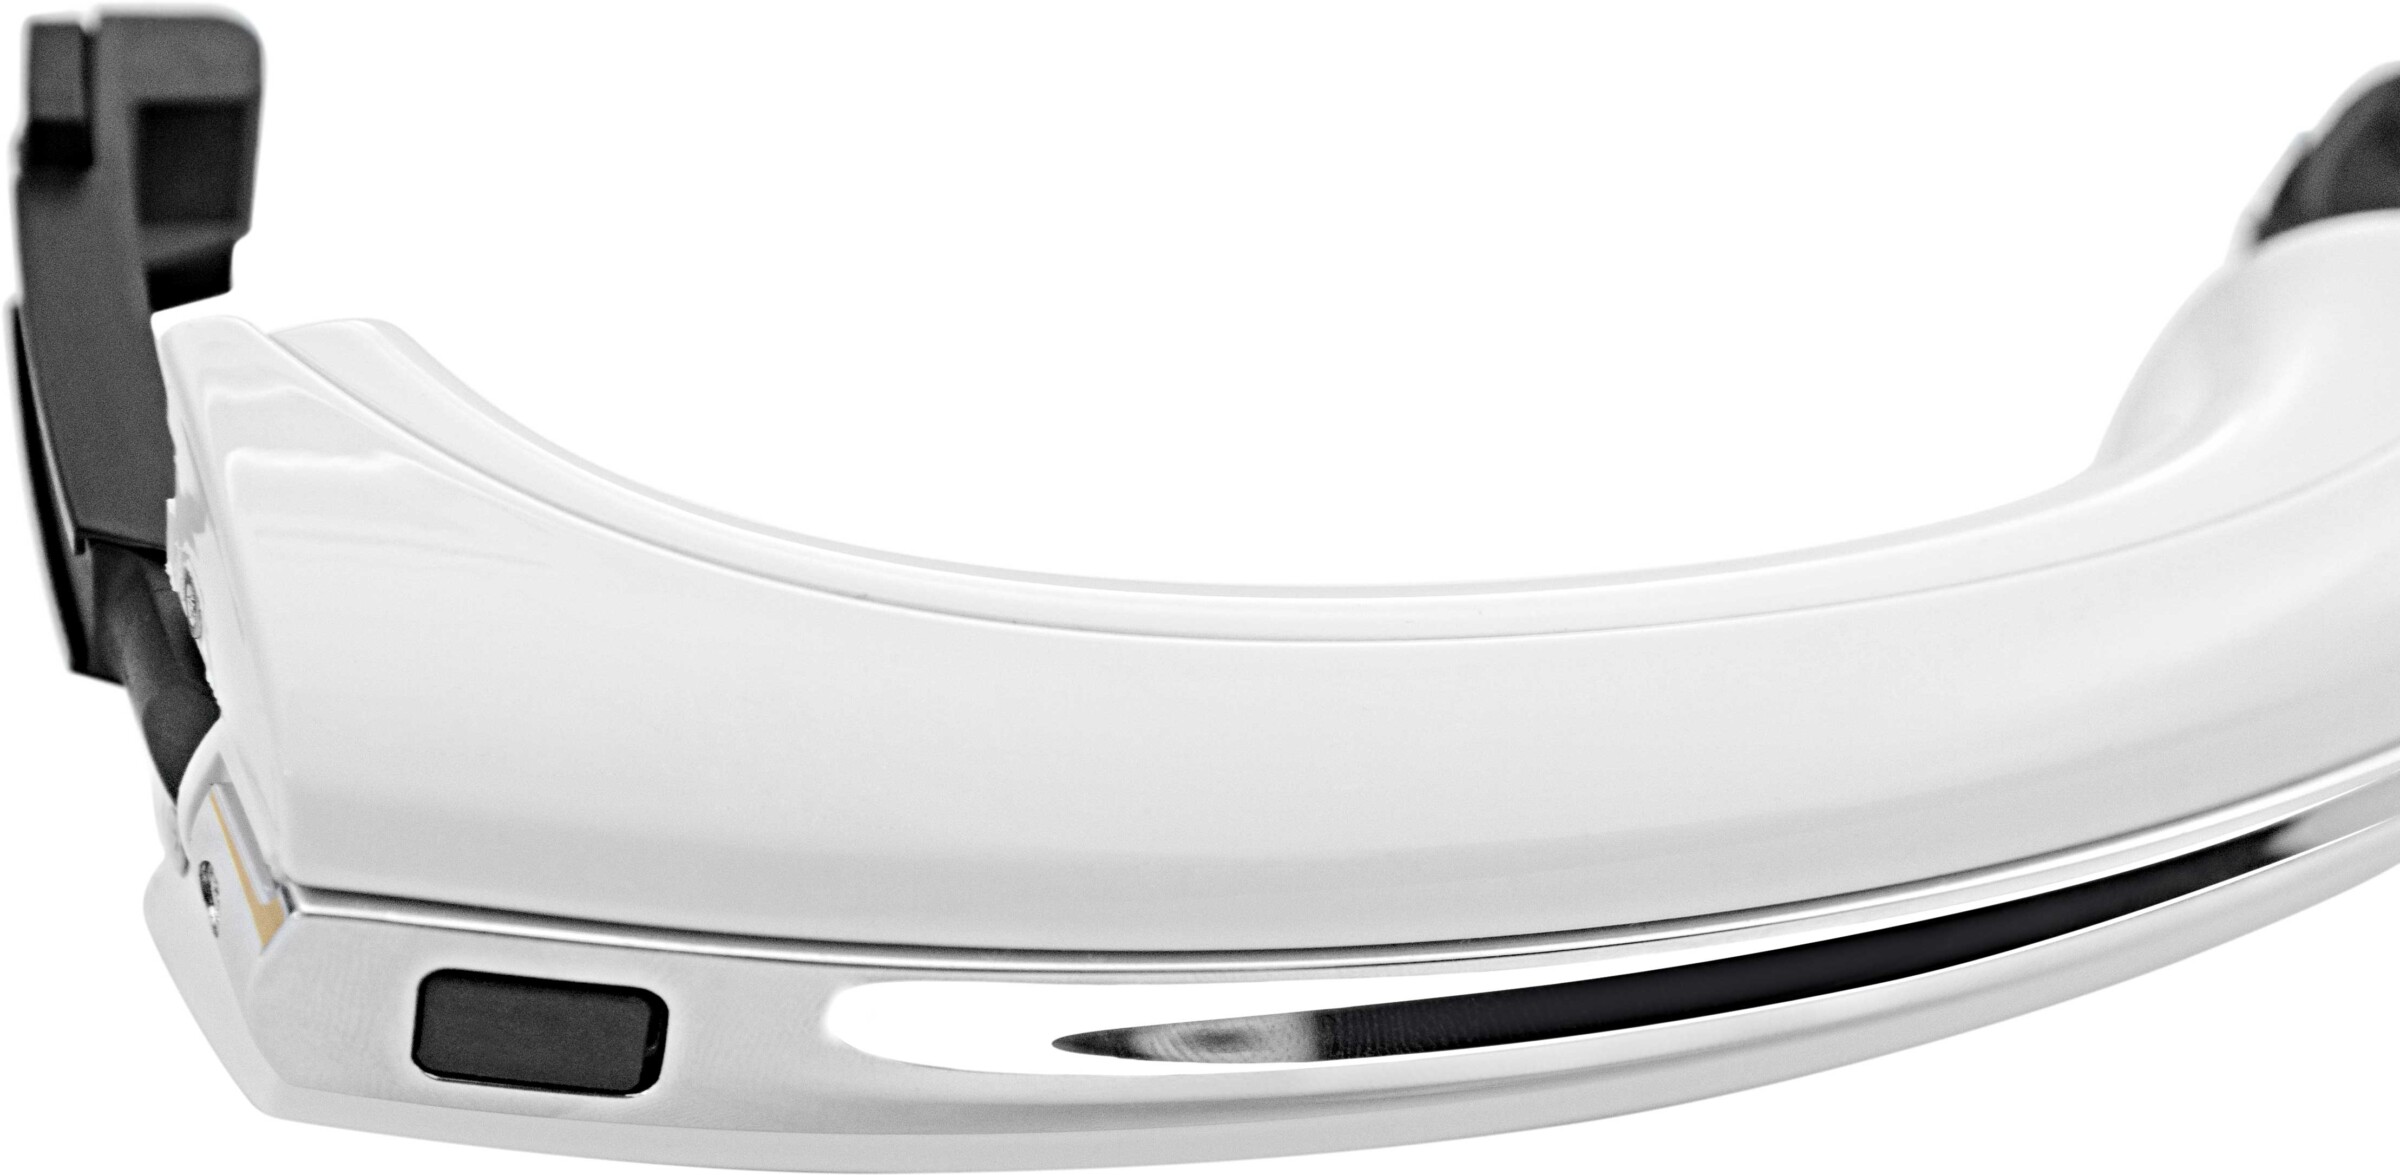 External door handle – an example of a final product for the automotive sector.